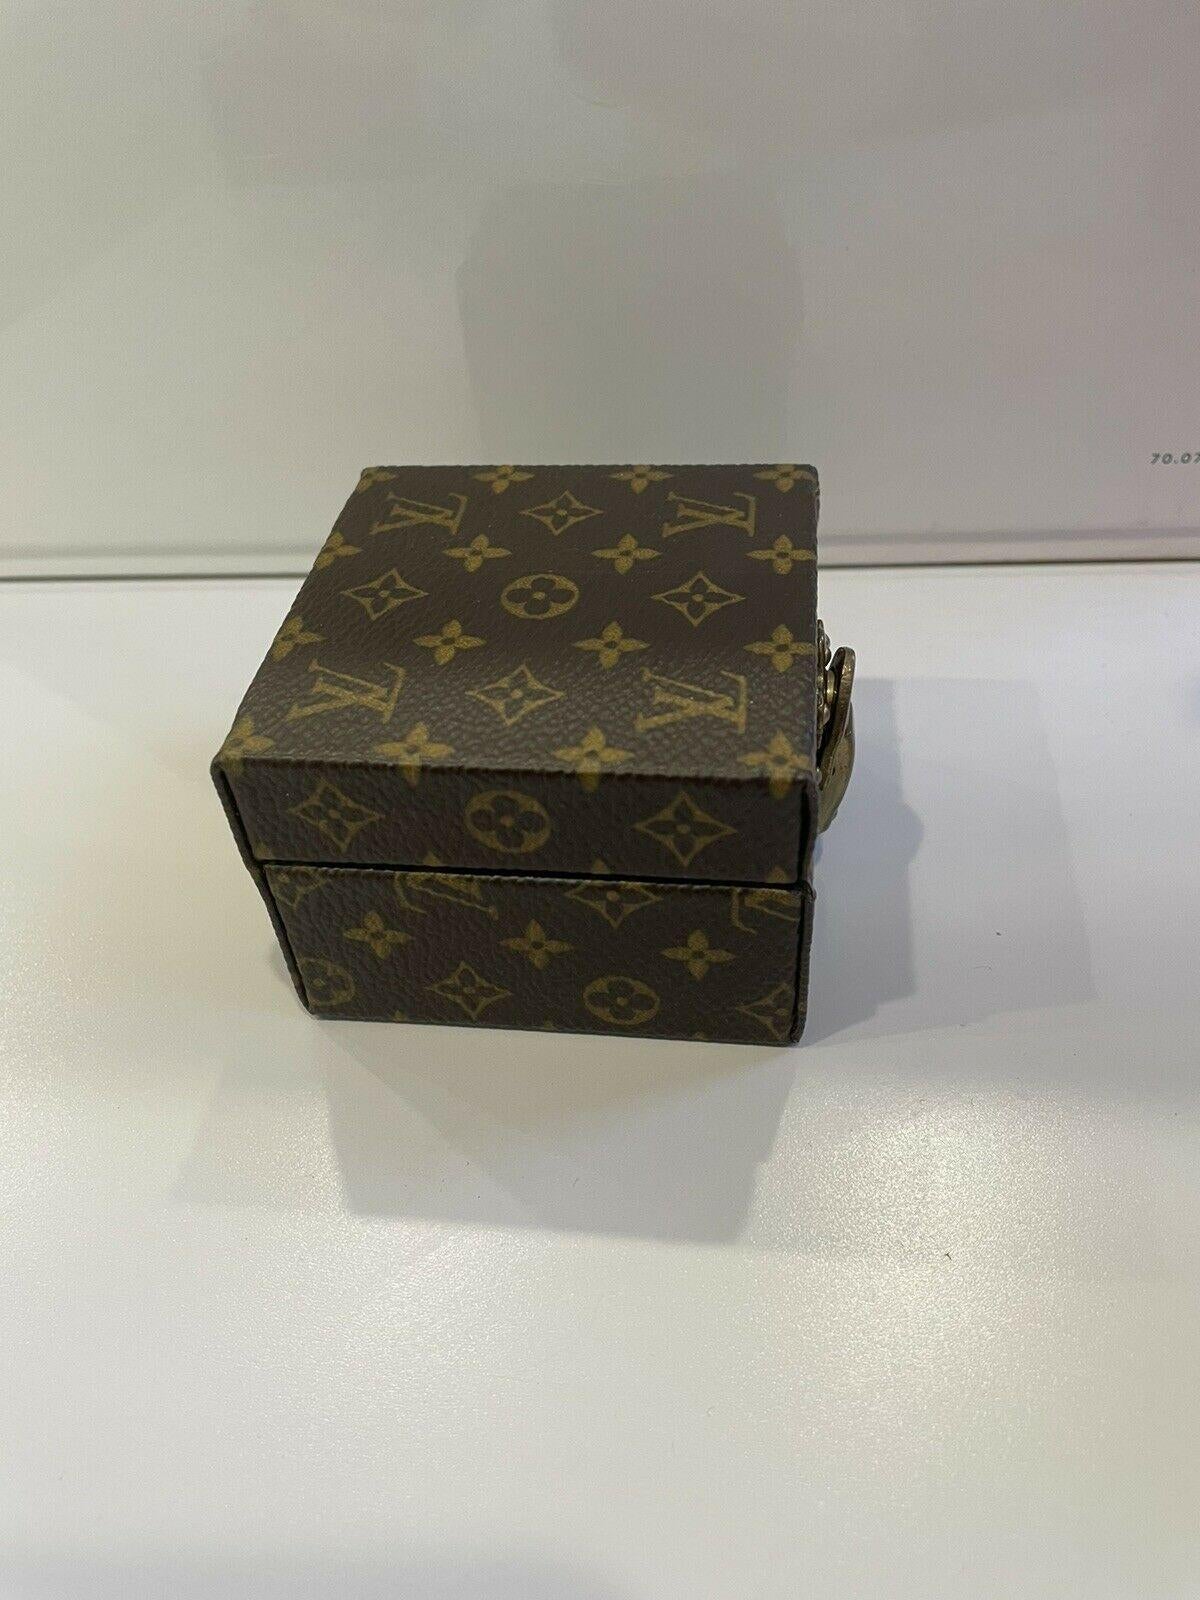 Authentic Louis Vuitton LV Logo Monogram Jewelry Hard Box Case In Excellent Condition For Sale In Beverly Hills, CA